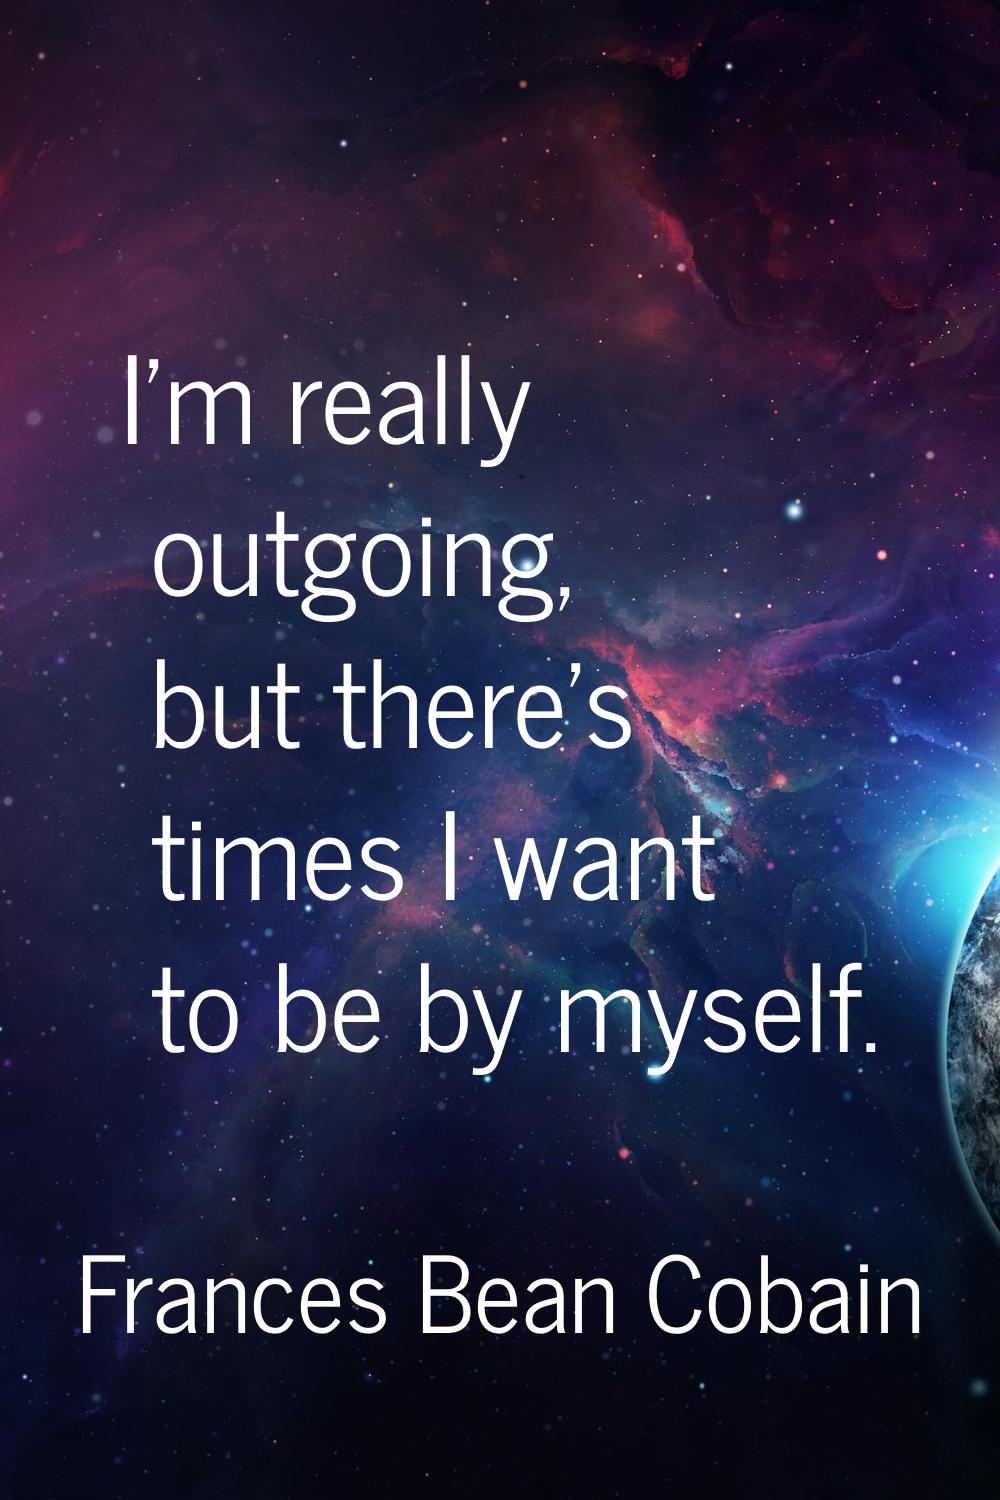 I'm really outgoing, but there's times I want to be by myself.